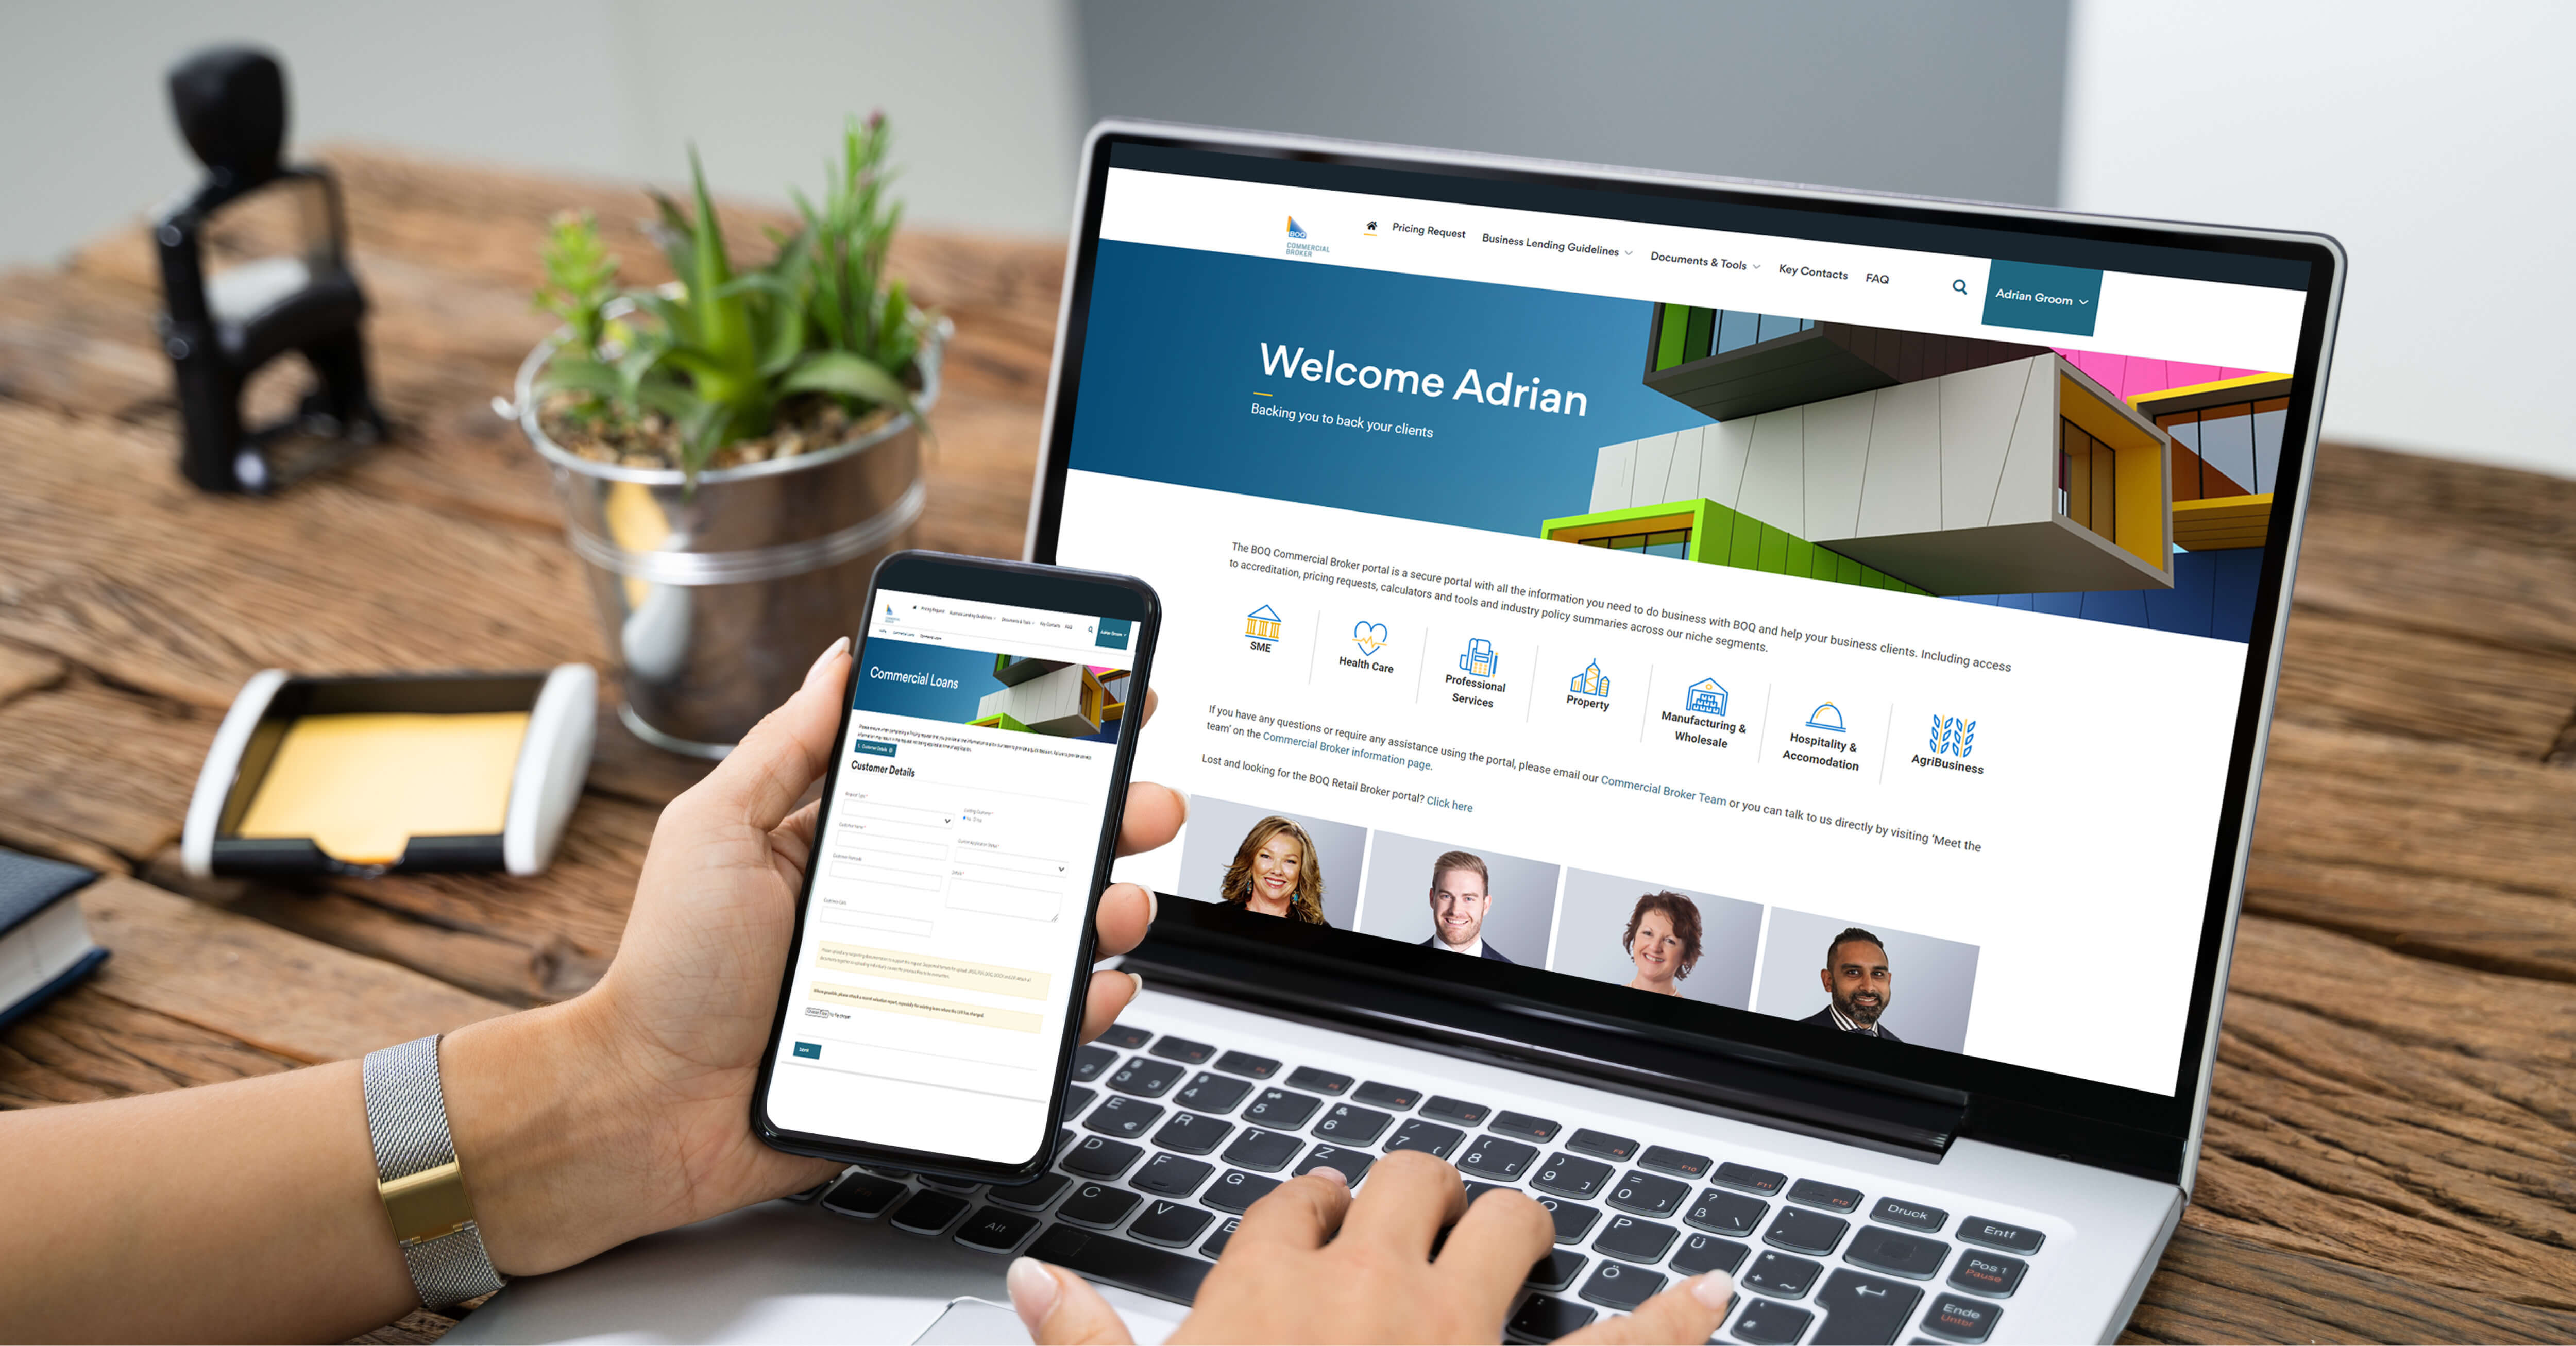 The BOQ Commercial Broker portal – a self-service platform for brokers launched in November 2021